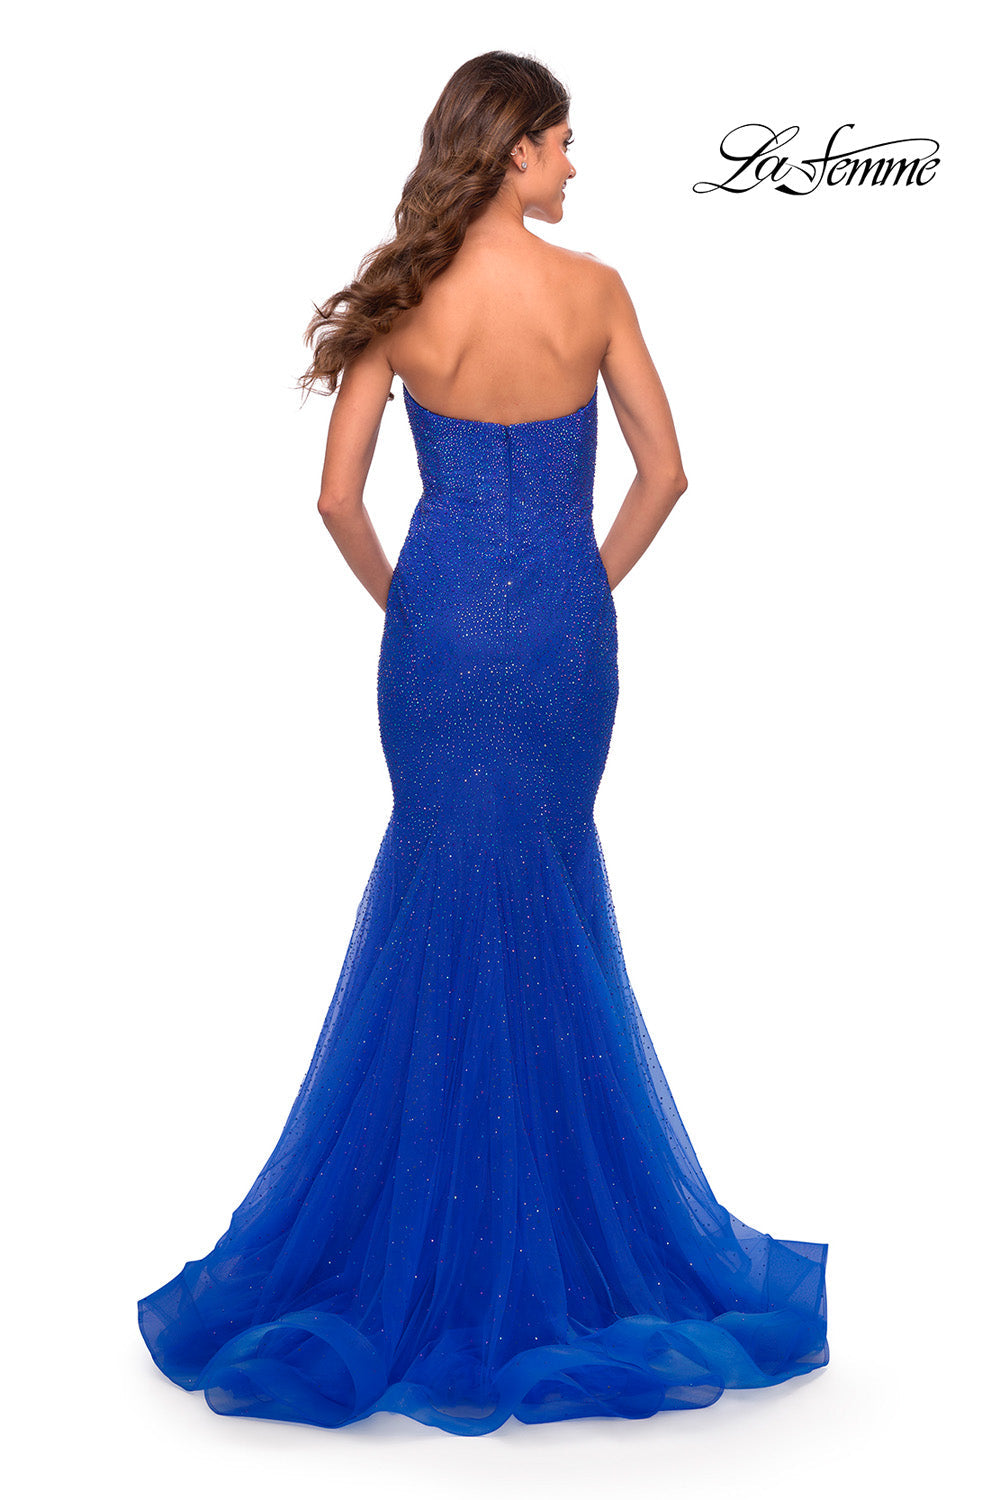 La Femme 31285 prom dress images.  La Femme 31285 is available in these colors: Red, Royal Blue, Sage.